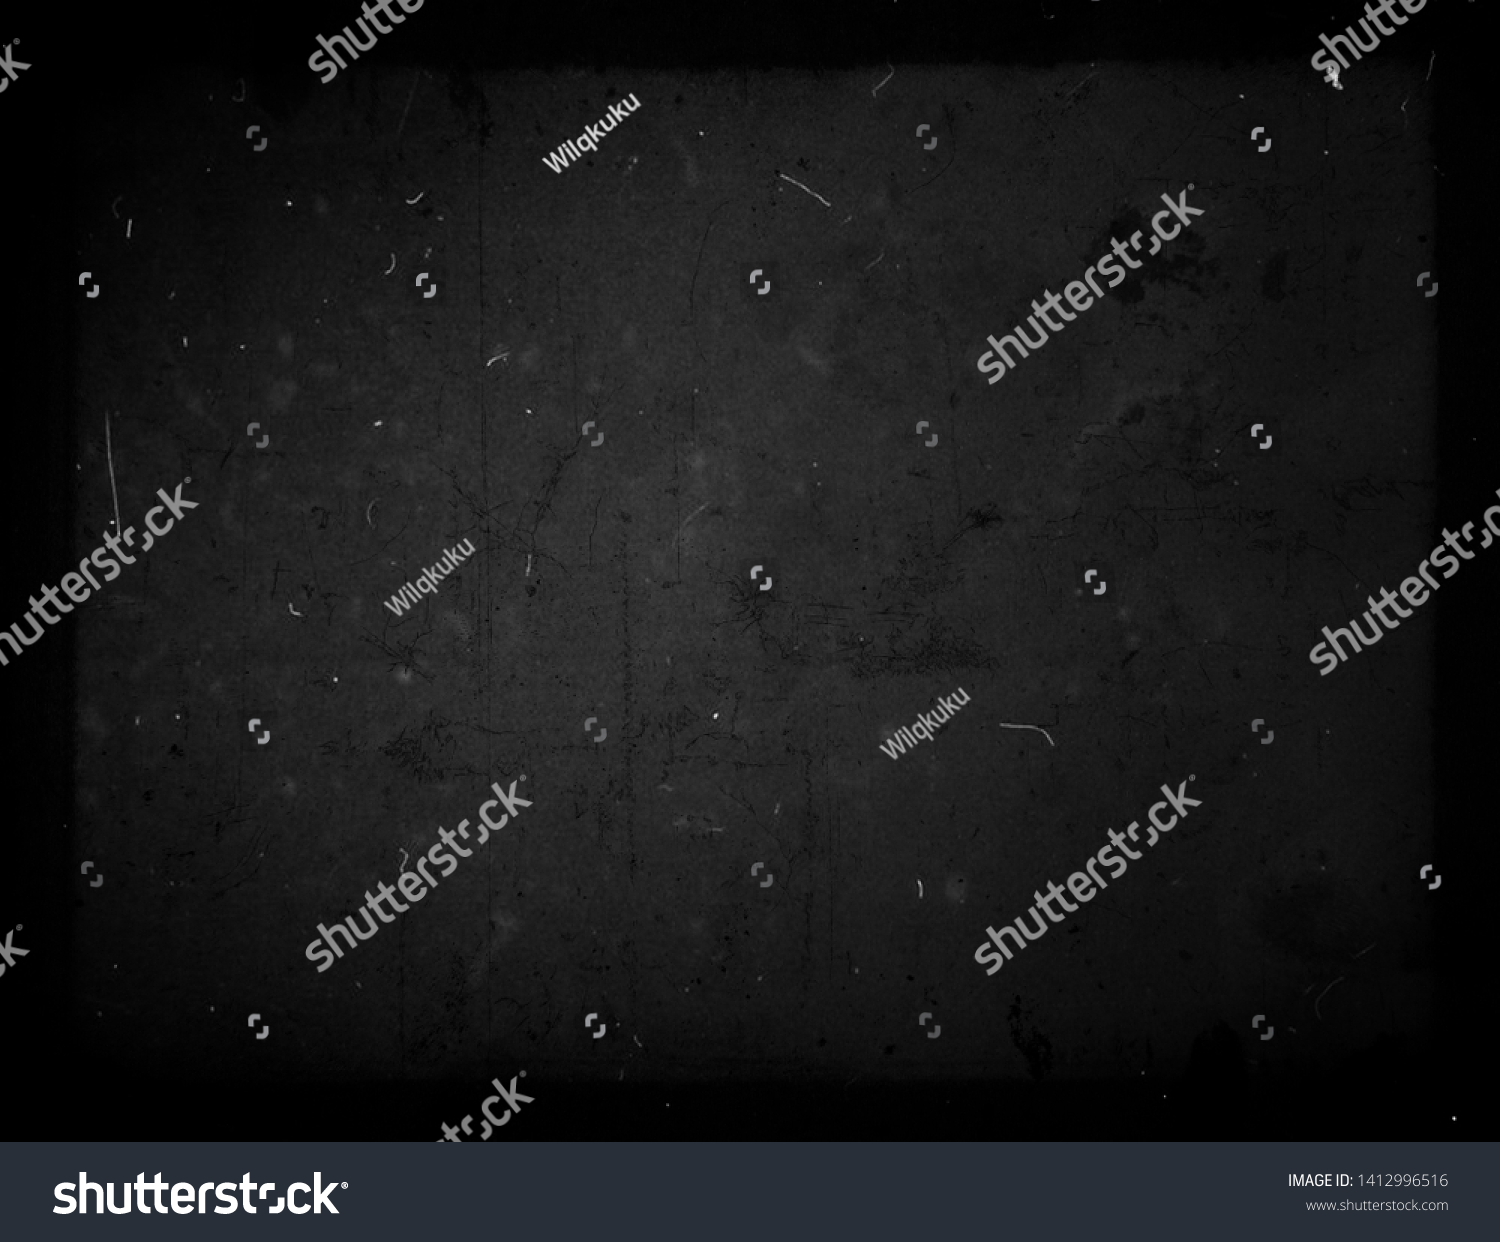 Black grunge scratched background, old film effect, scary dusty texture #1412996516